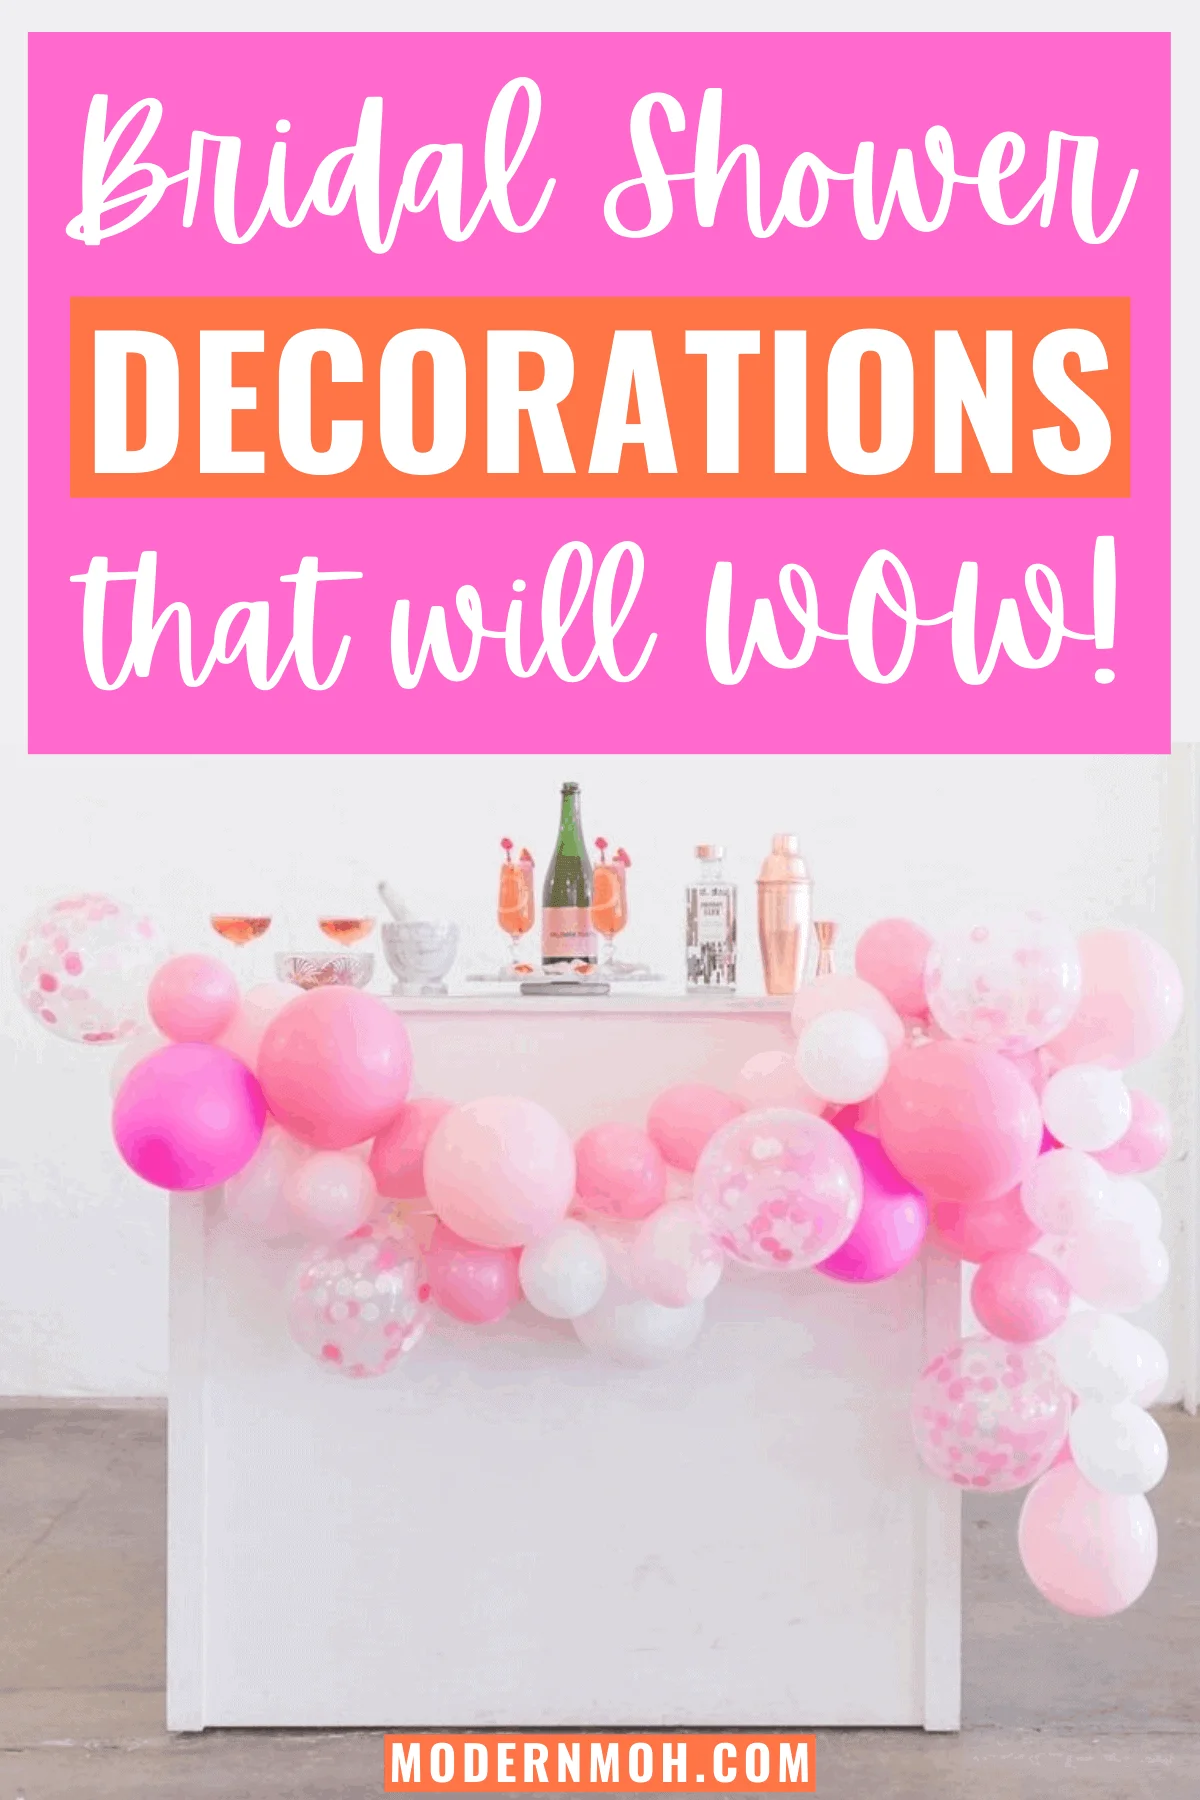 32 Bridal Shower Decorations for a Picture-Perfect Party